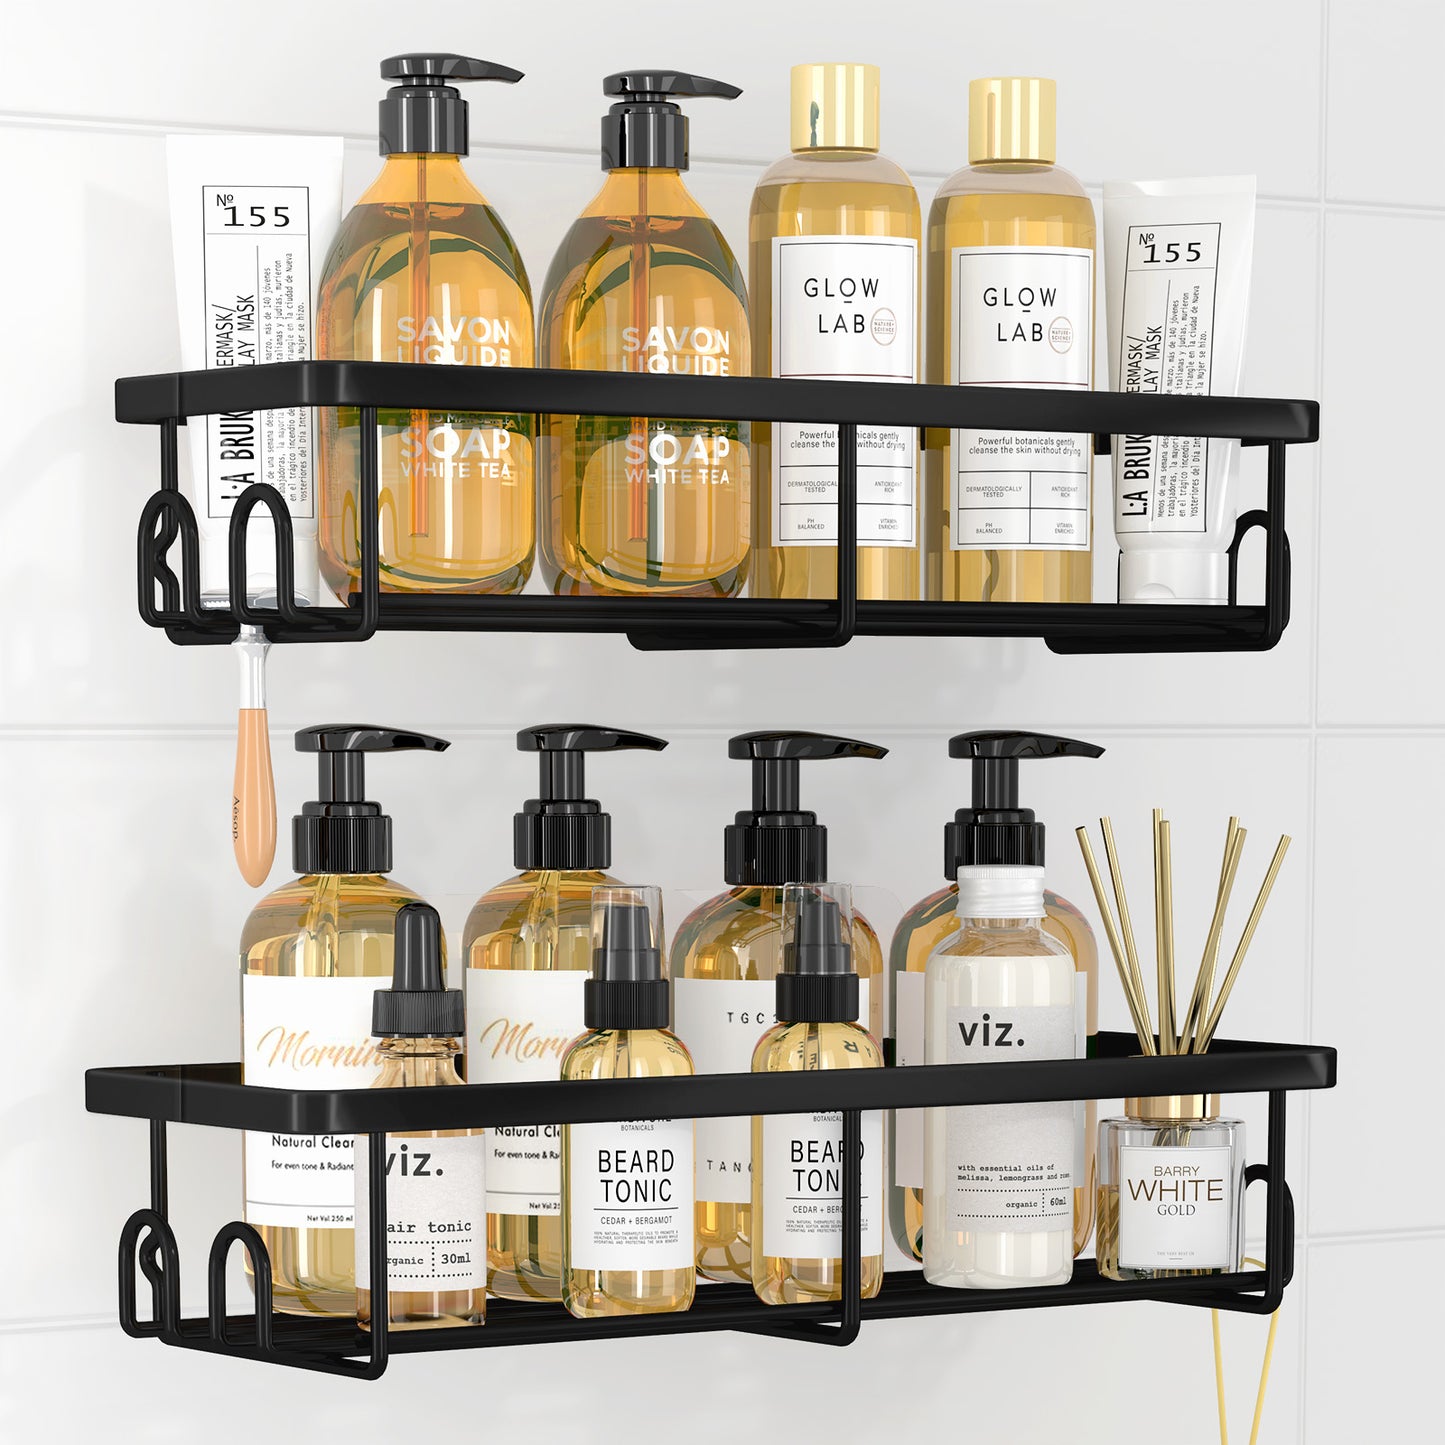 Kitsure Shower Caddy - 2 Pack Rustproof Shower Organizer, Drill-Free & Quick-Dry Shower Shelves for inside Shower with Large Capacity, Durable Stainless Steel Shower Rack with 4 Hooks, Black (4167)